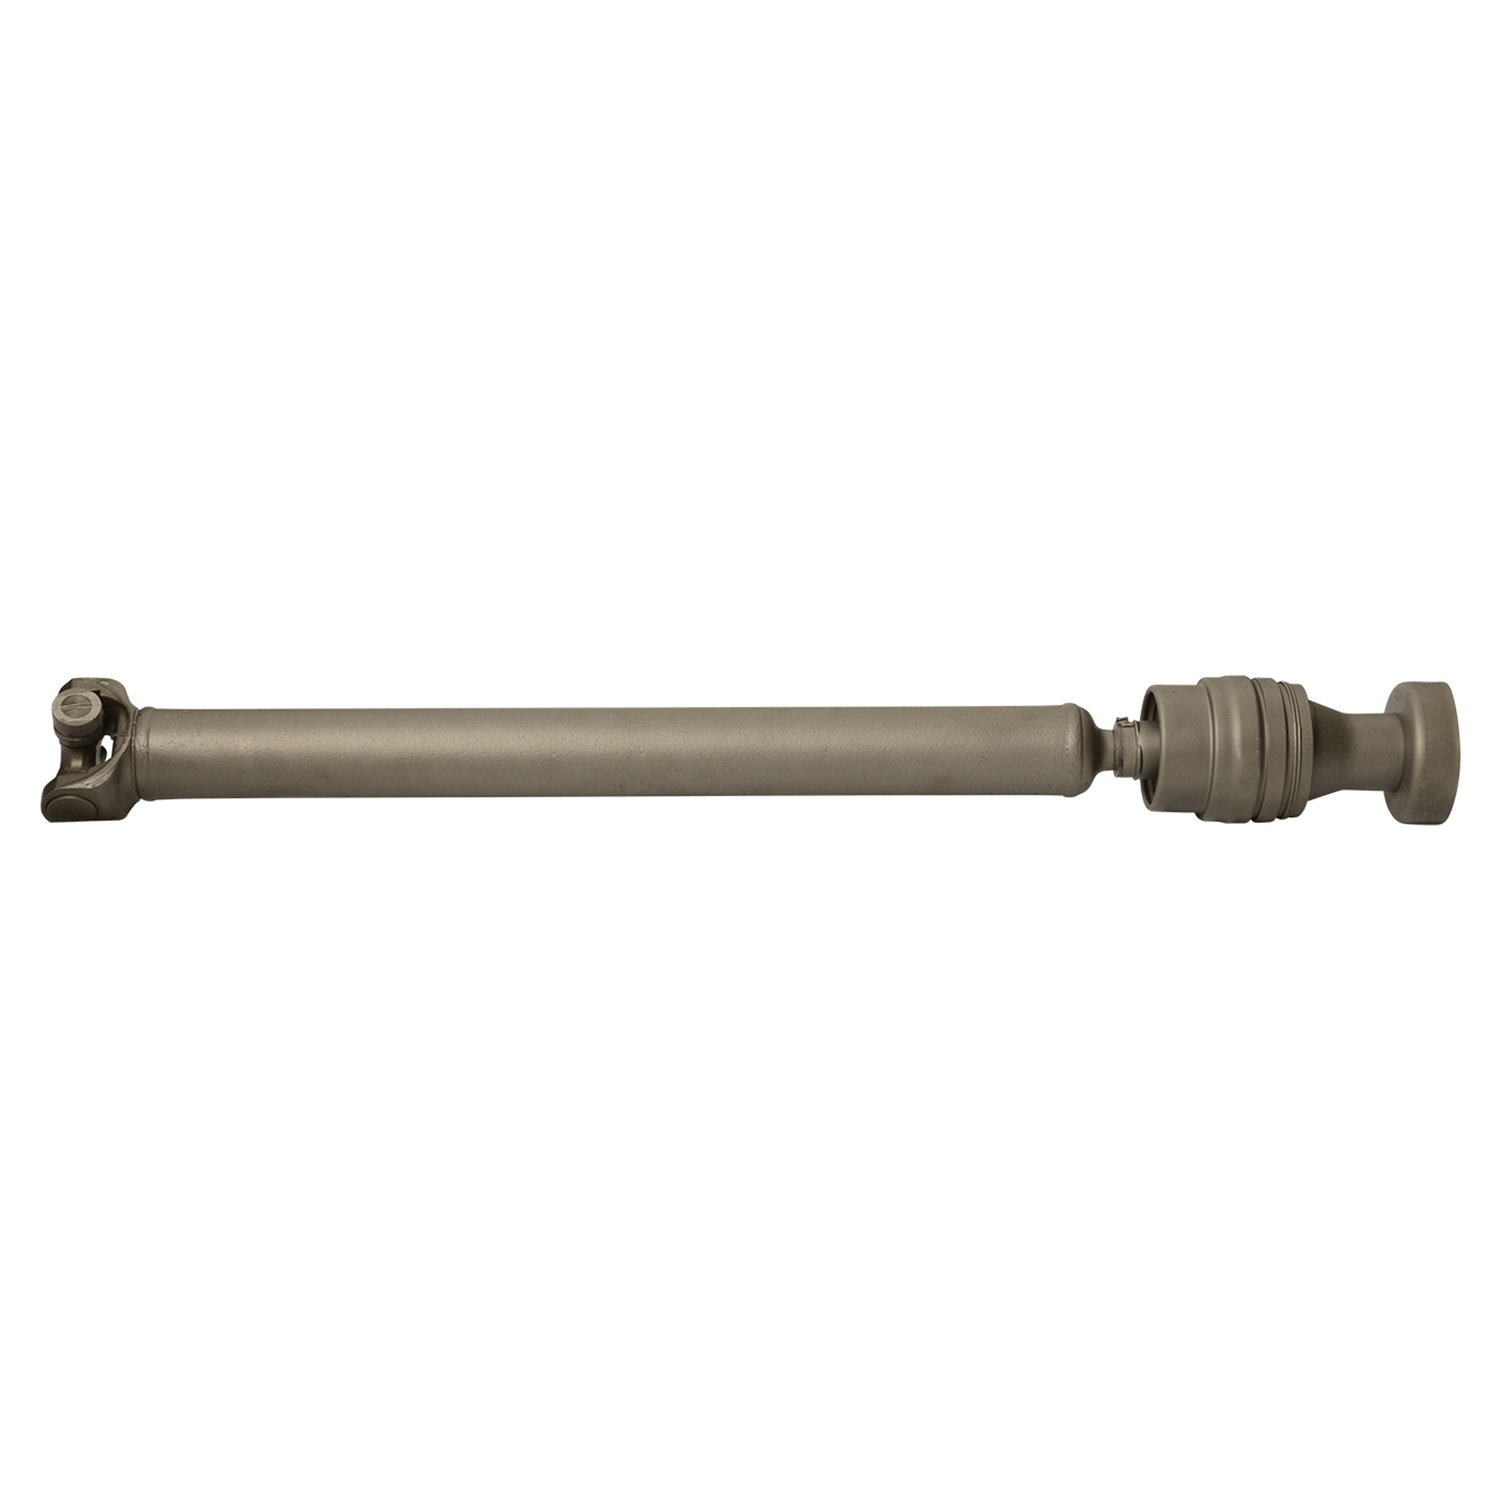 USA Standard ZDS9359 Front Driveshaft GM Blazer S10/Bravada/Rodeo/Hombre, 29.5 in. Flange To Center